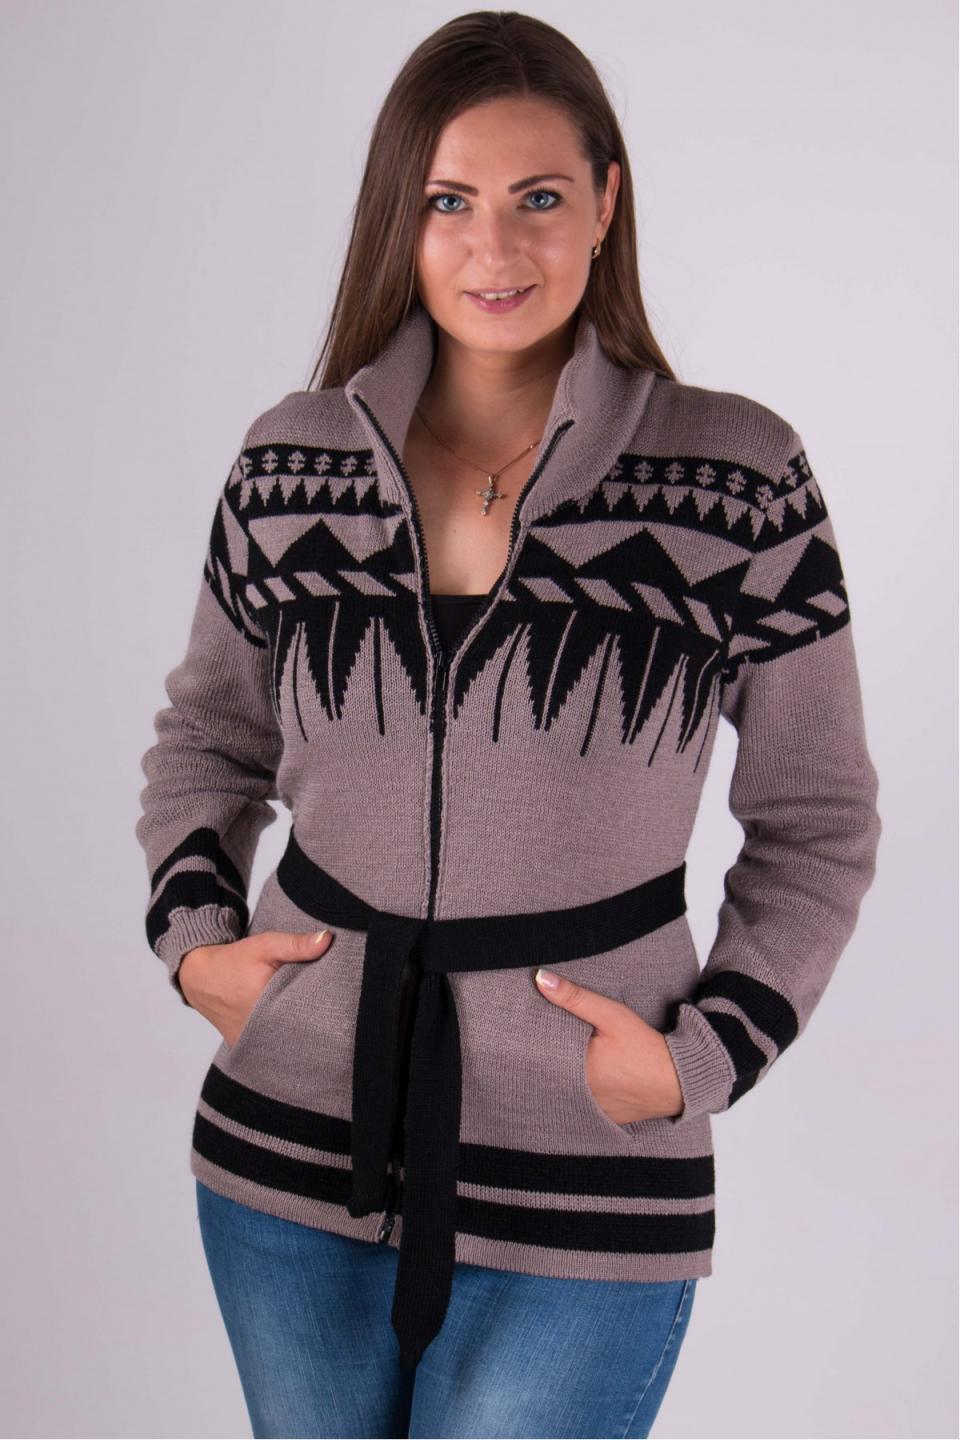 Knitted sweater with a zipper &quot;Toffee&quot; (cappuccino, black)